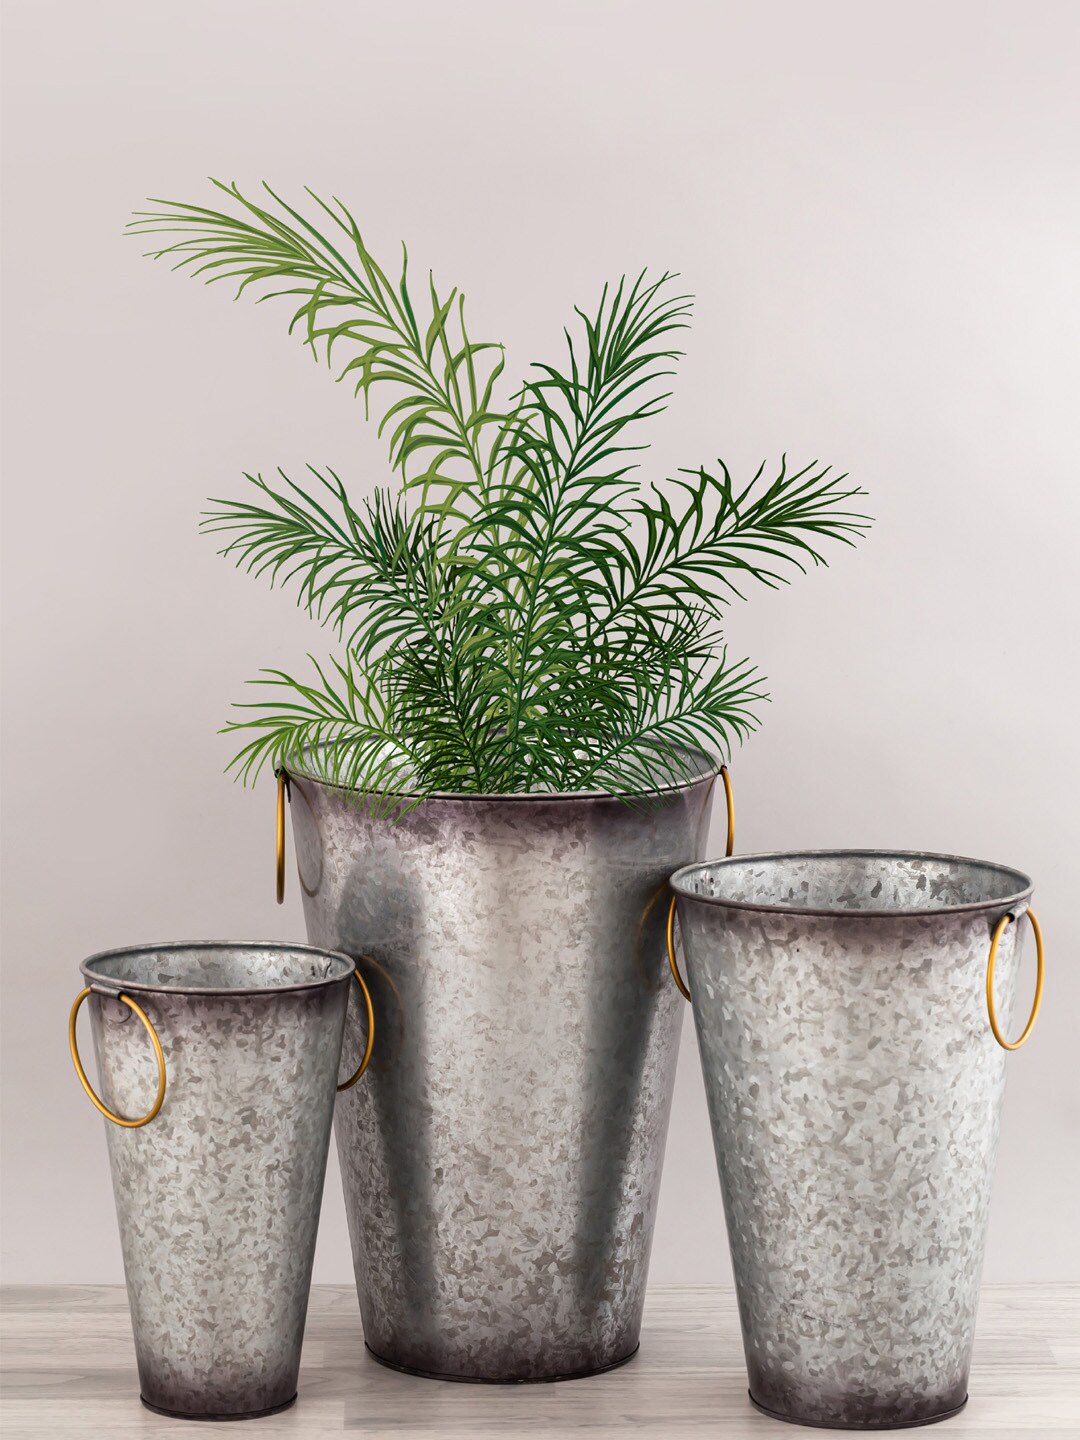 Aapno Rajasthan Set of 3 Galvanized Metal Planters with Golden Hoops Price in India